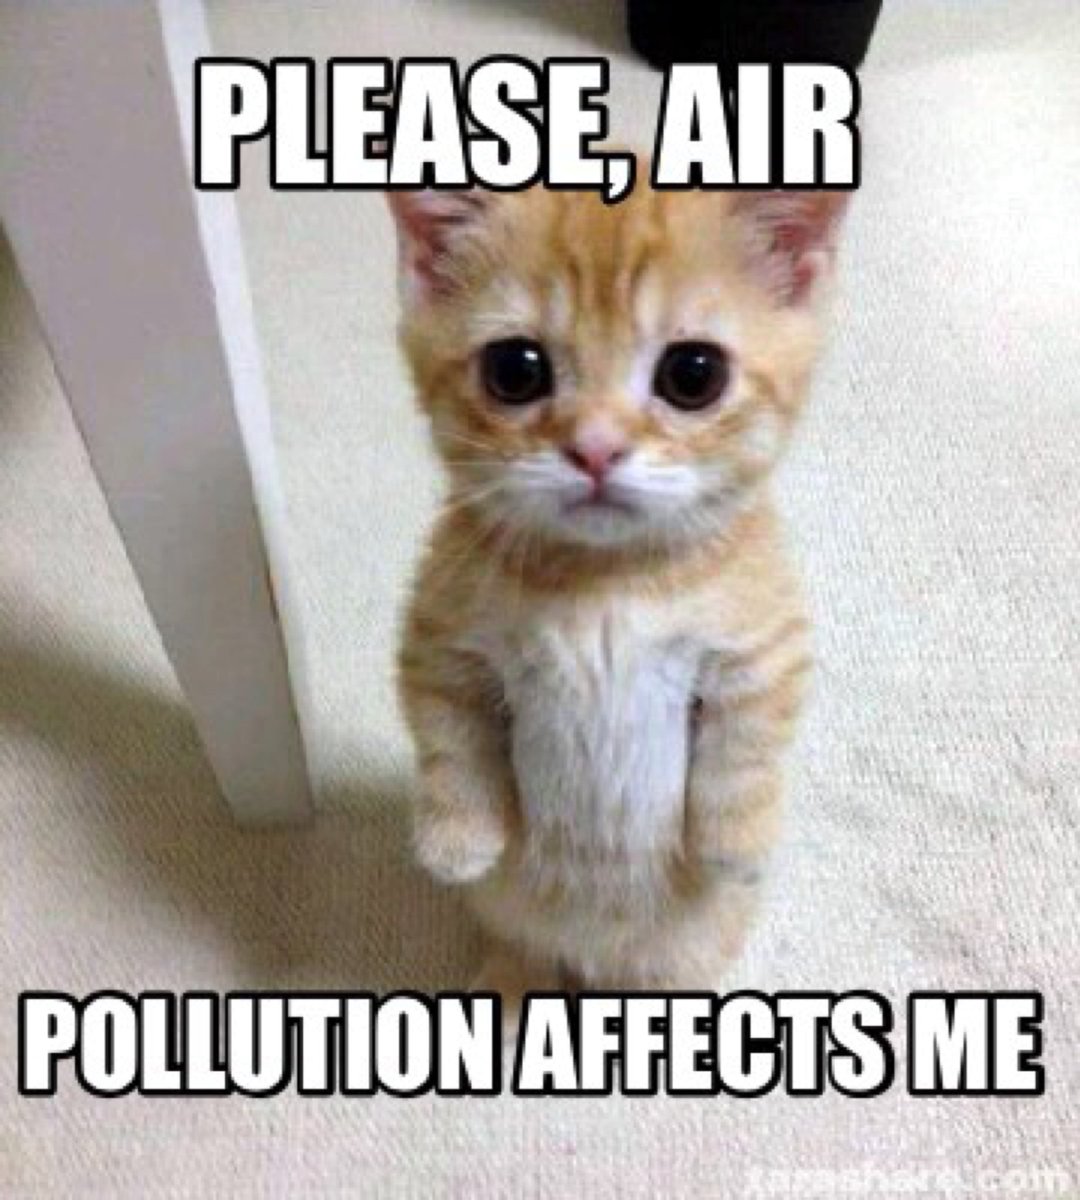 #stopairpollution #pollution #savetheplanet #earthfirst #ClimateAction #ClimateCrisis #ClimateEmergency